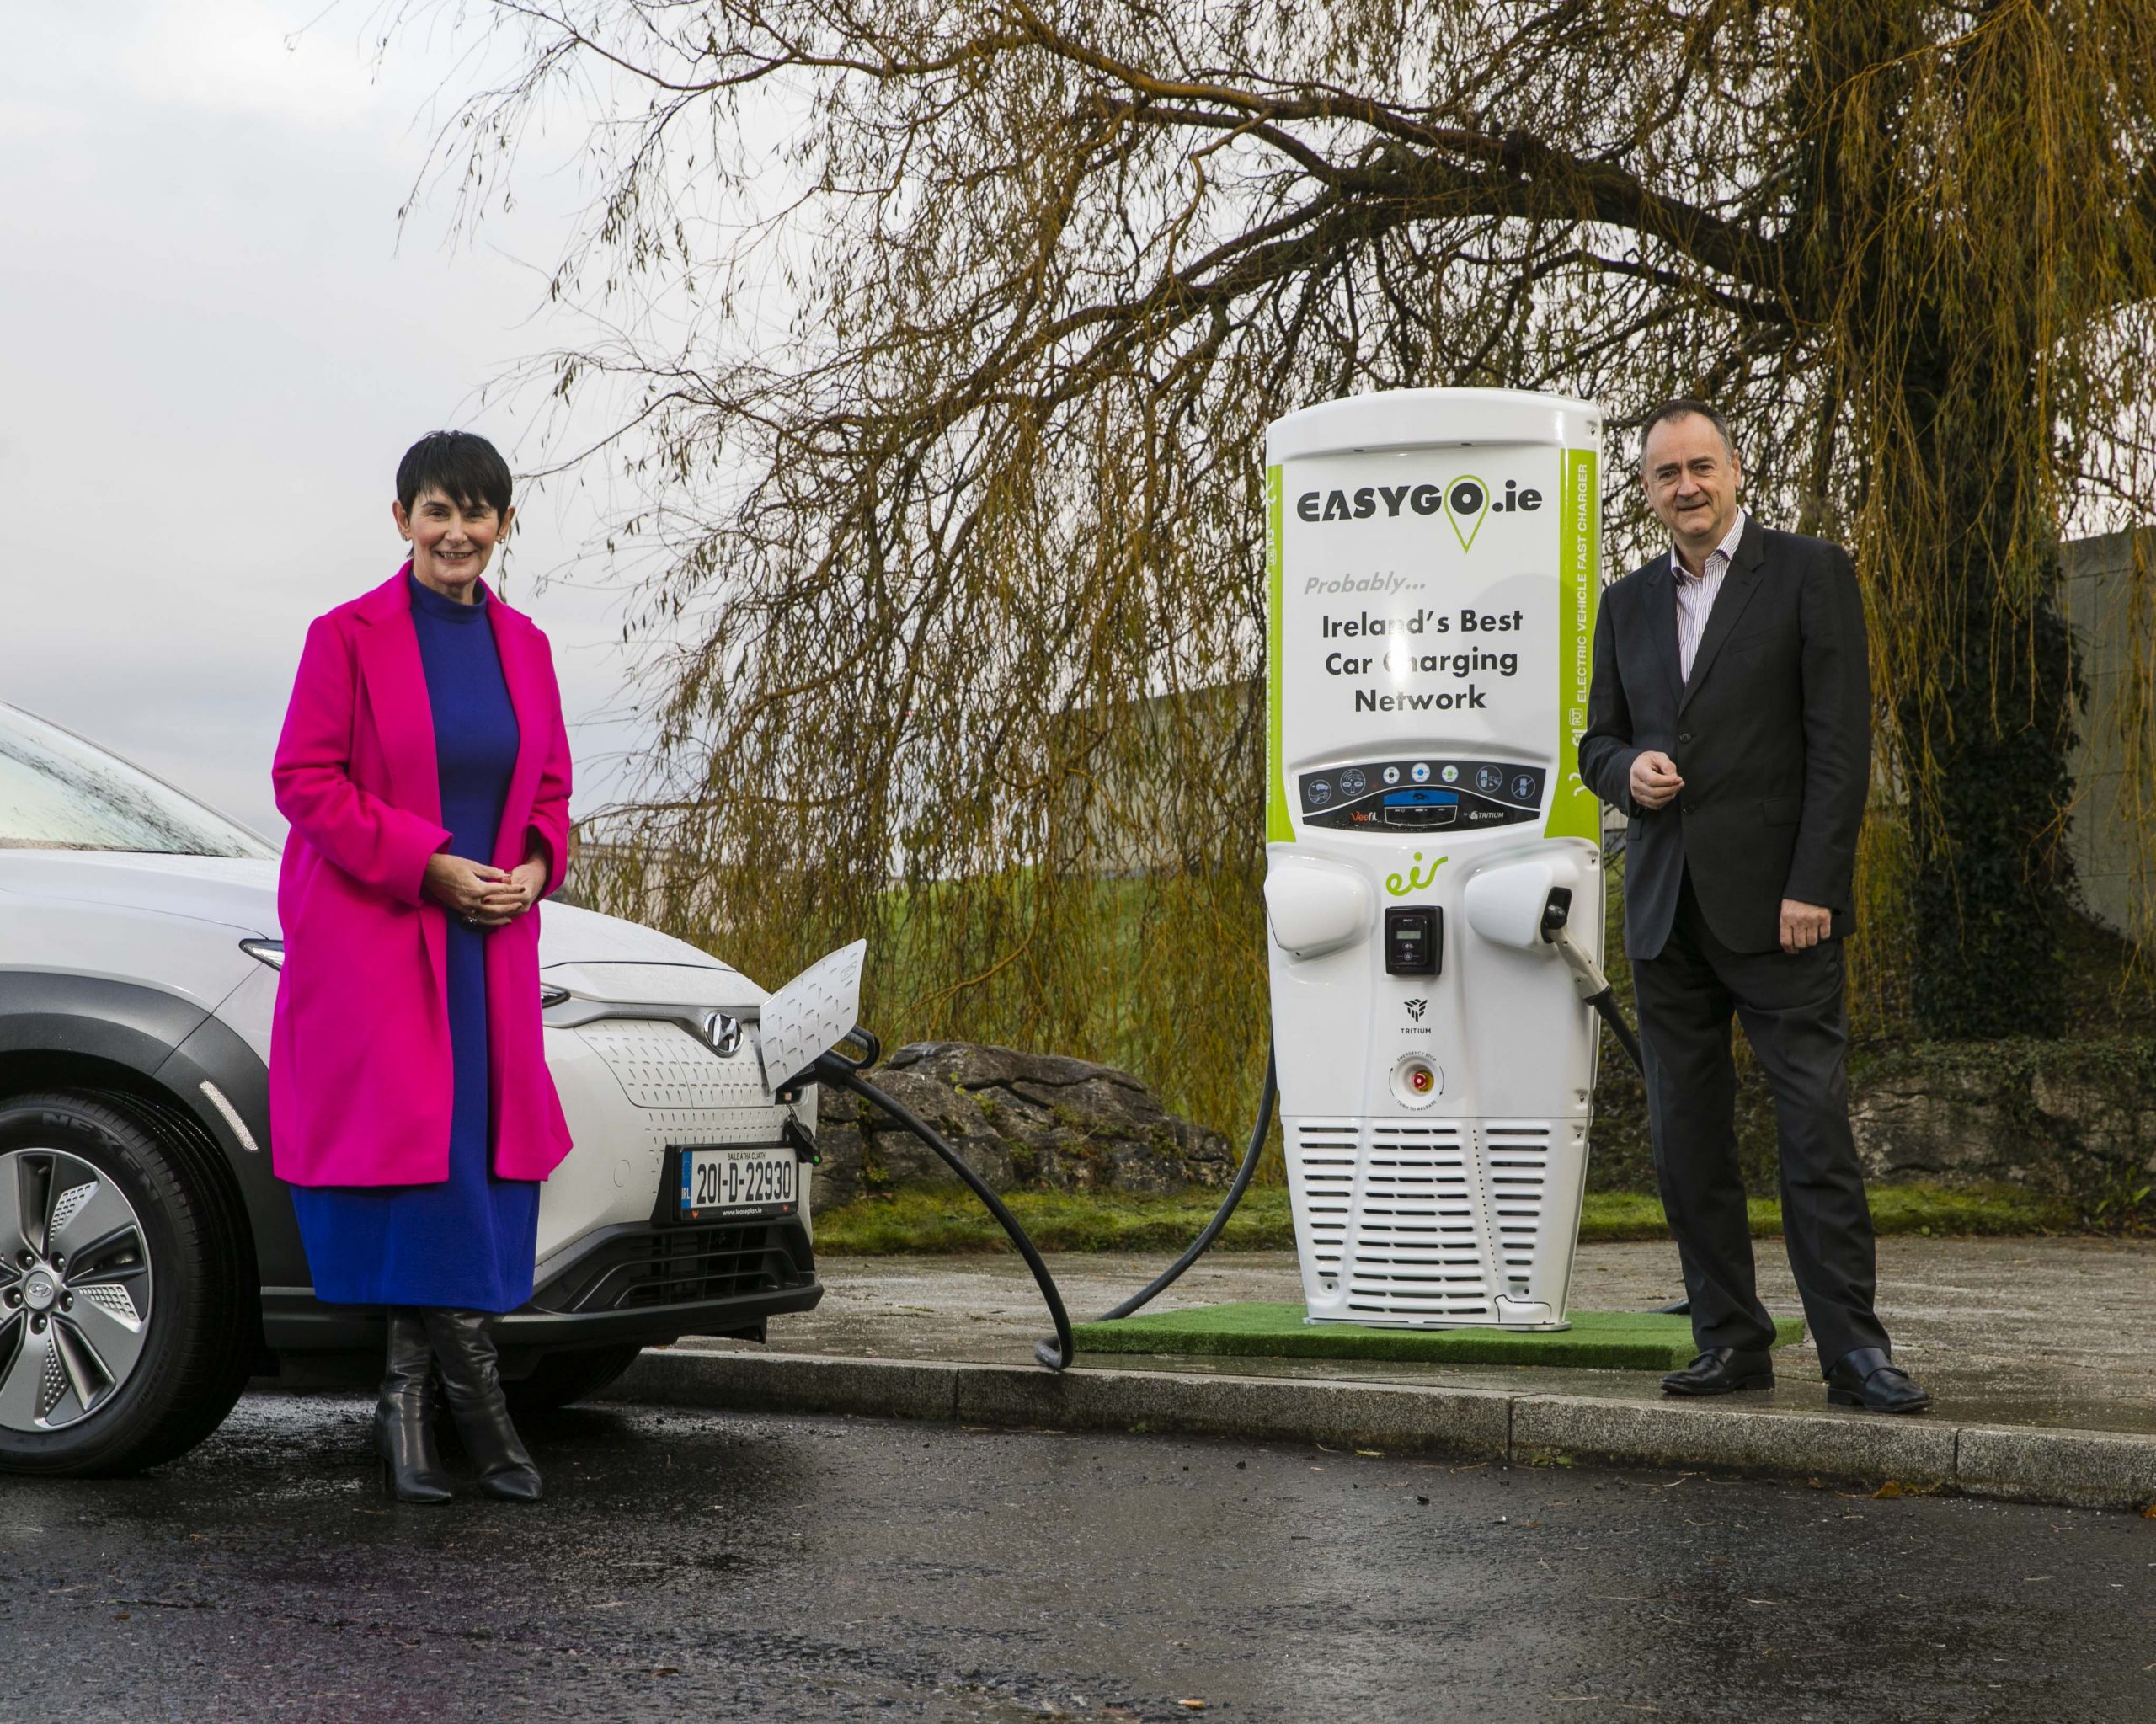 EasyGo and eir charging point with Carolan Lennon and Gerry Cash pictured